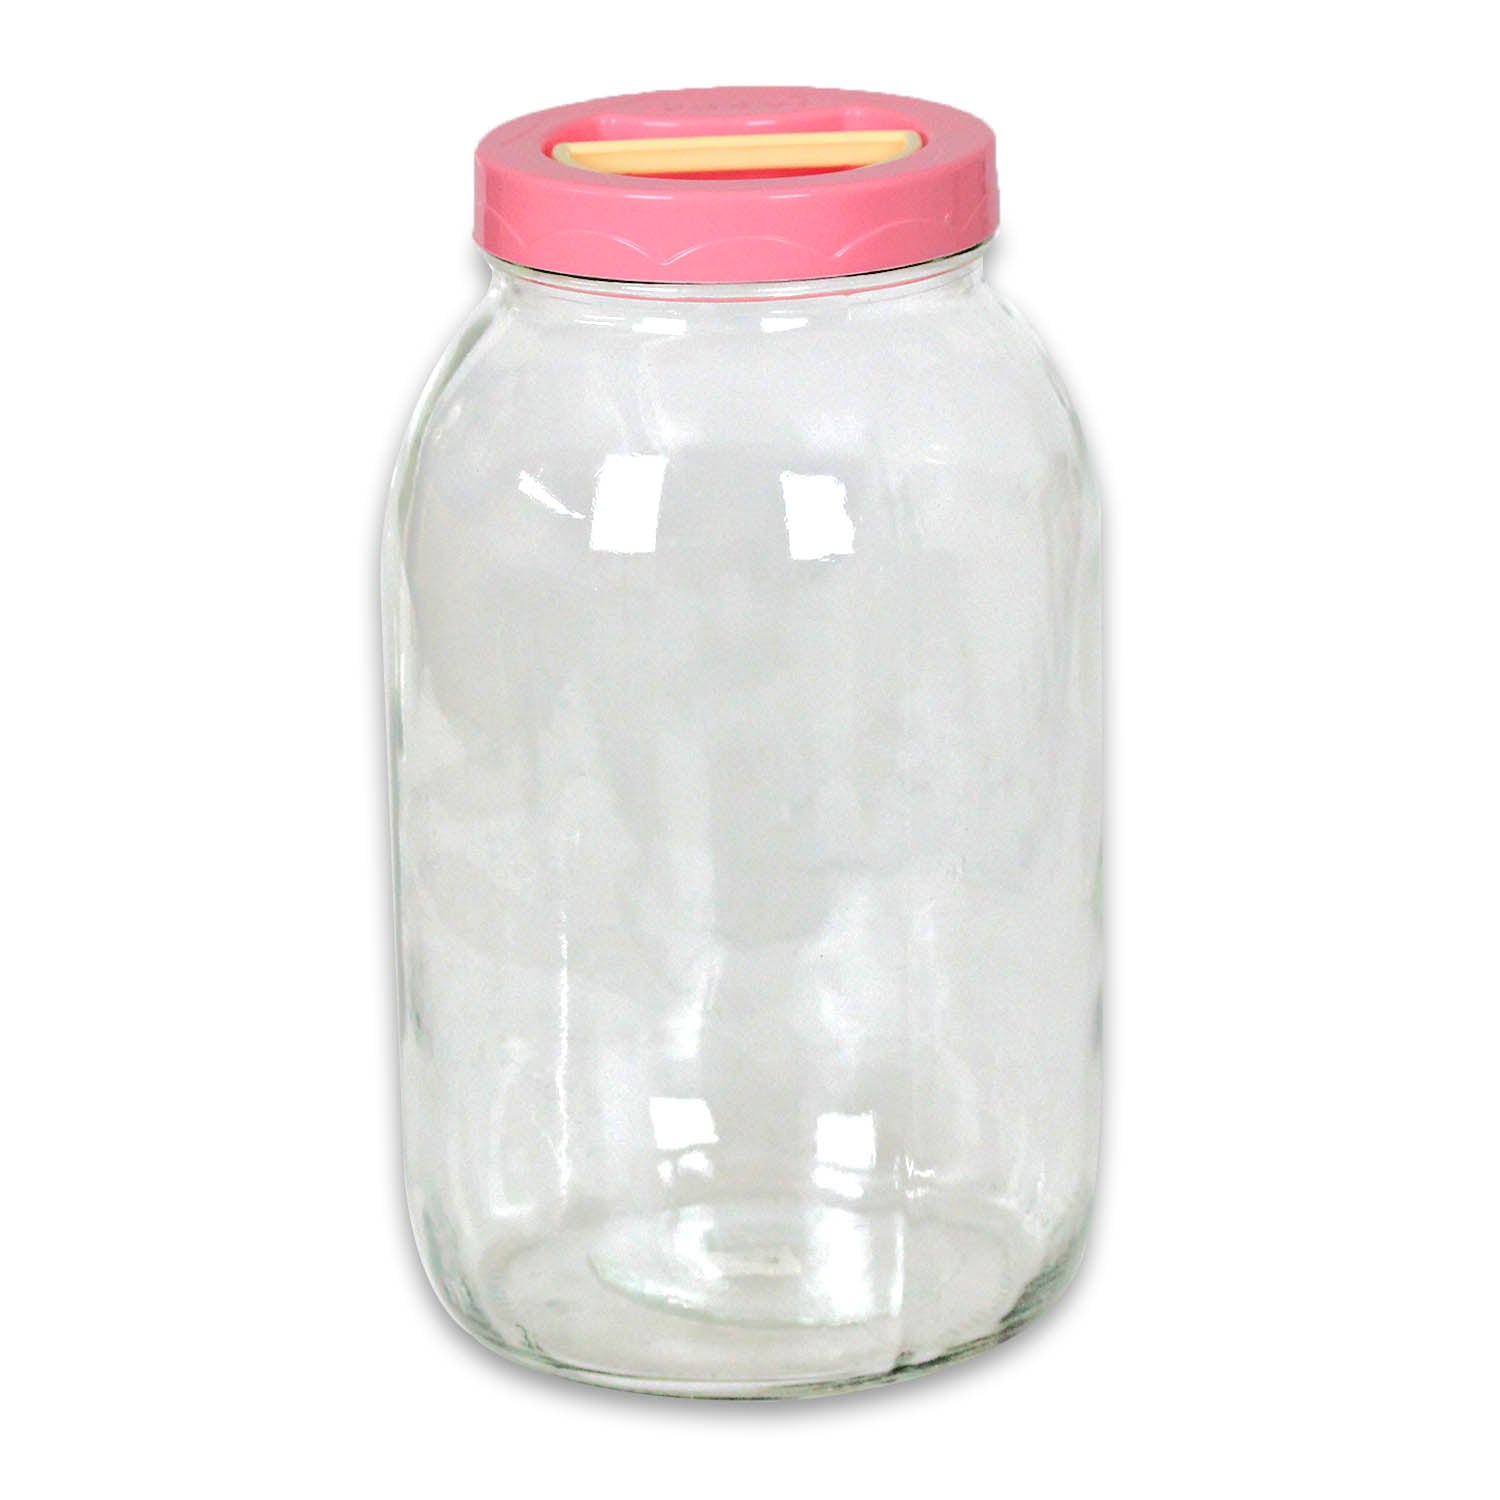 3L Glass Jar Food Container